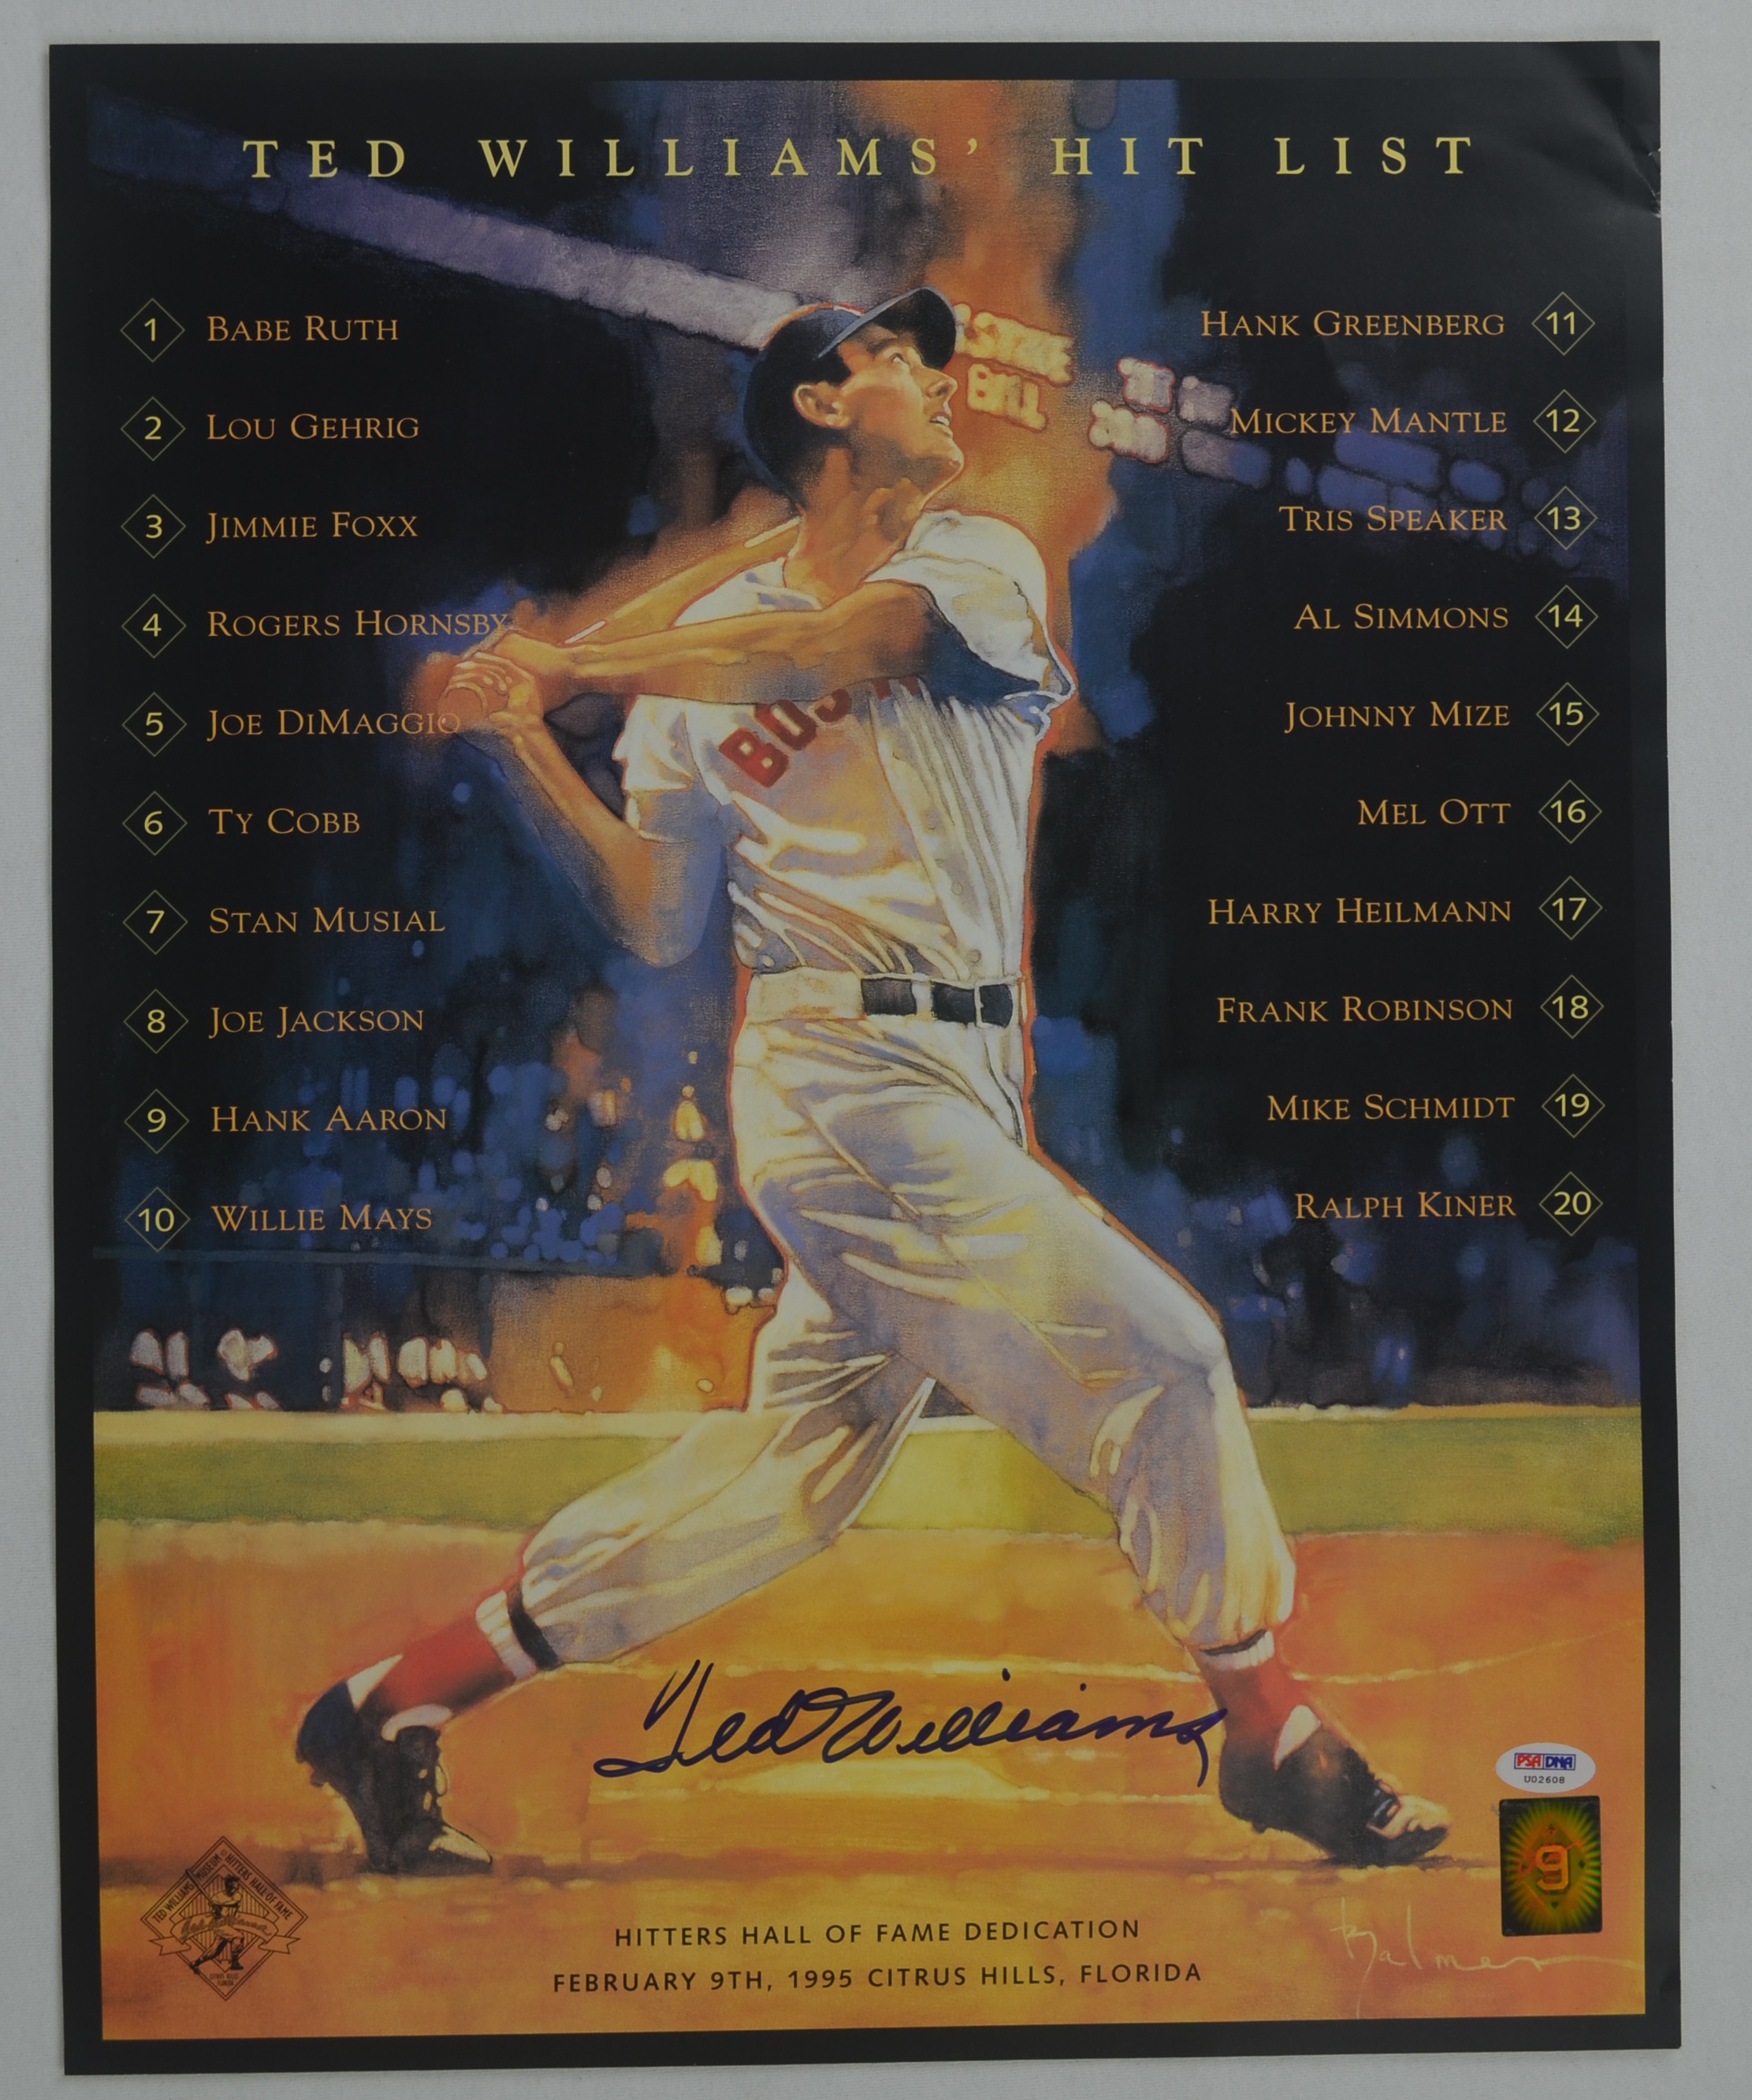 Ted Williams Hitters Hall of Fame Autographed Photo.